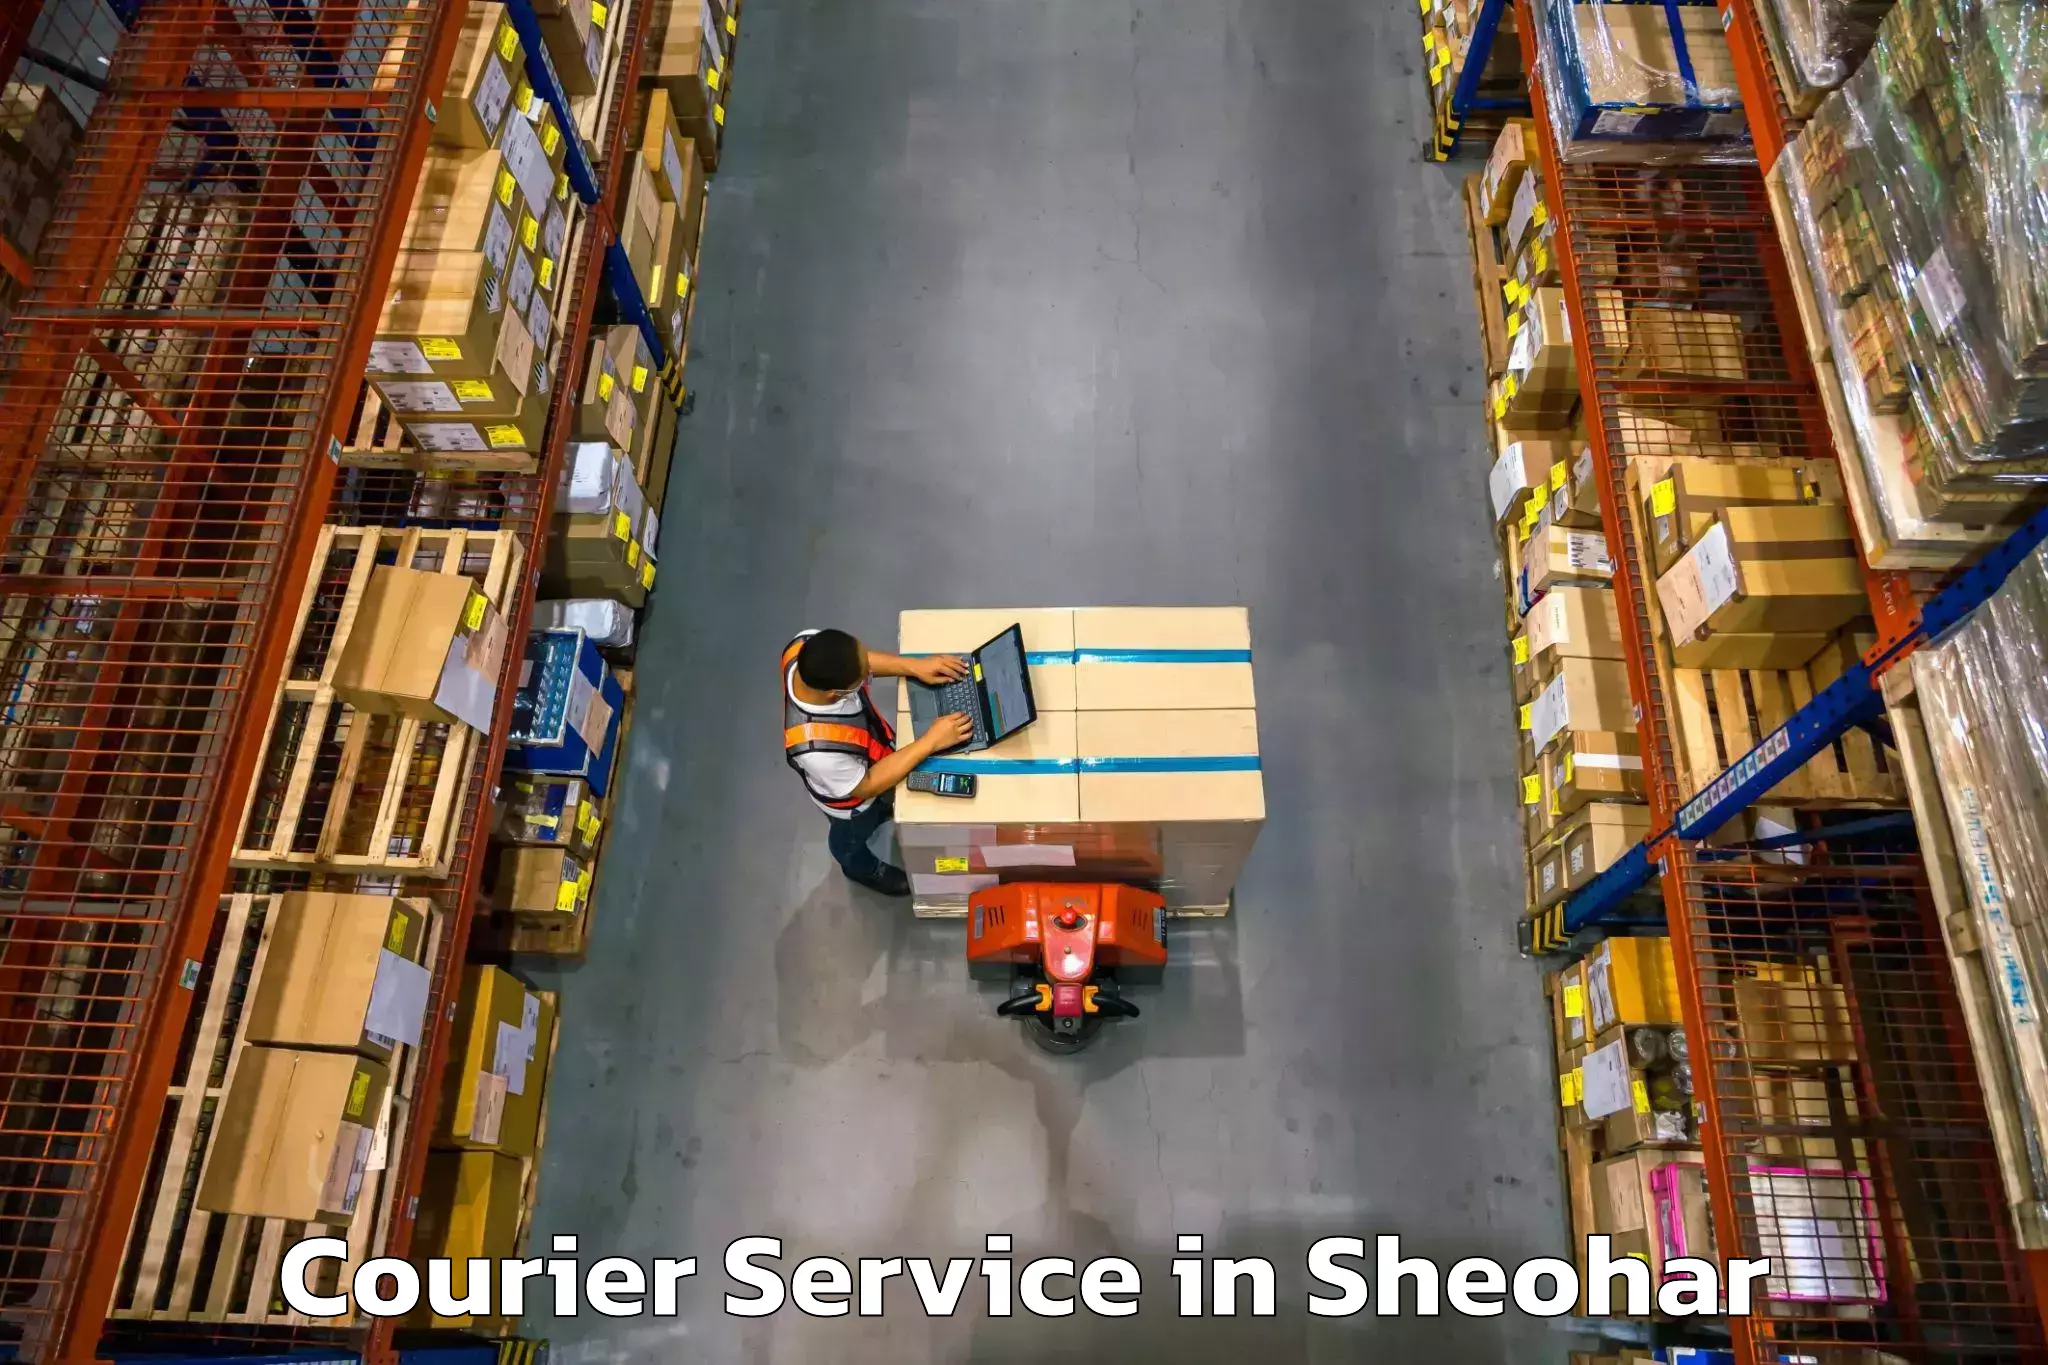 Weekend courier service in Sheohar